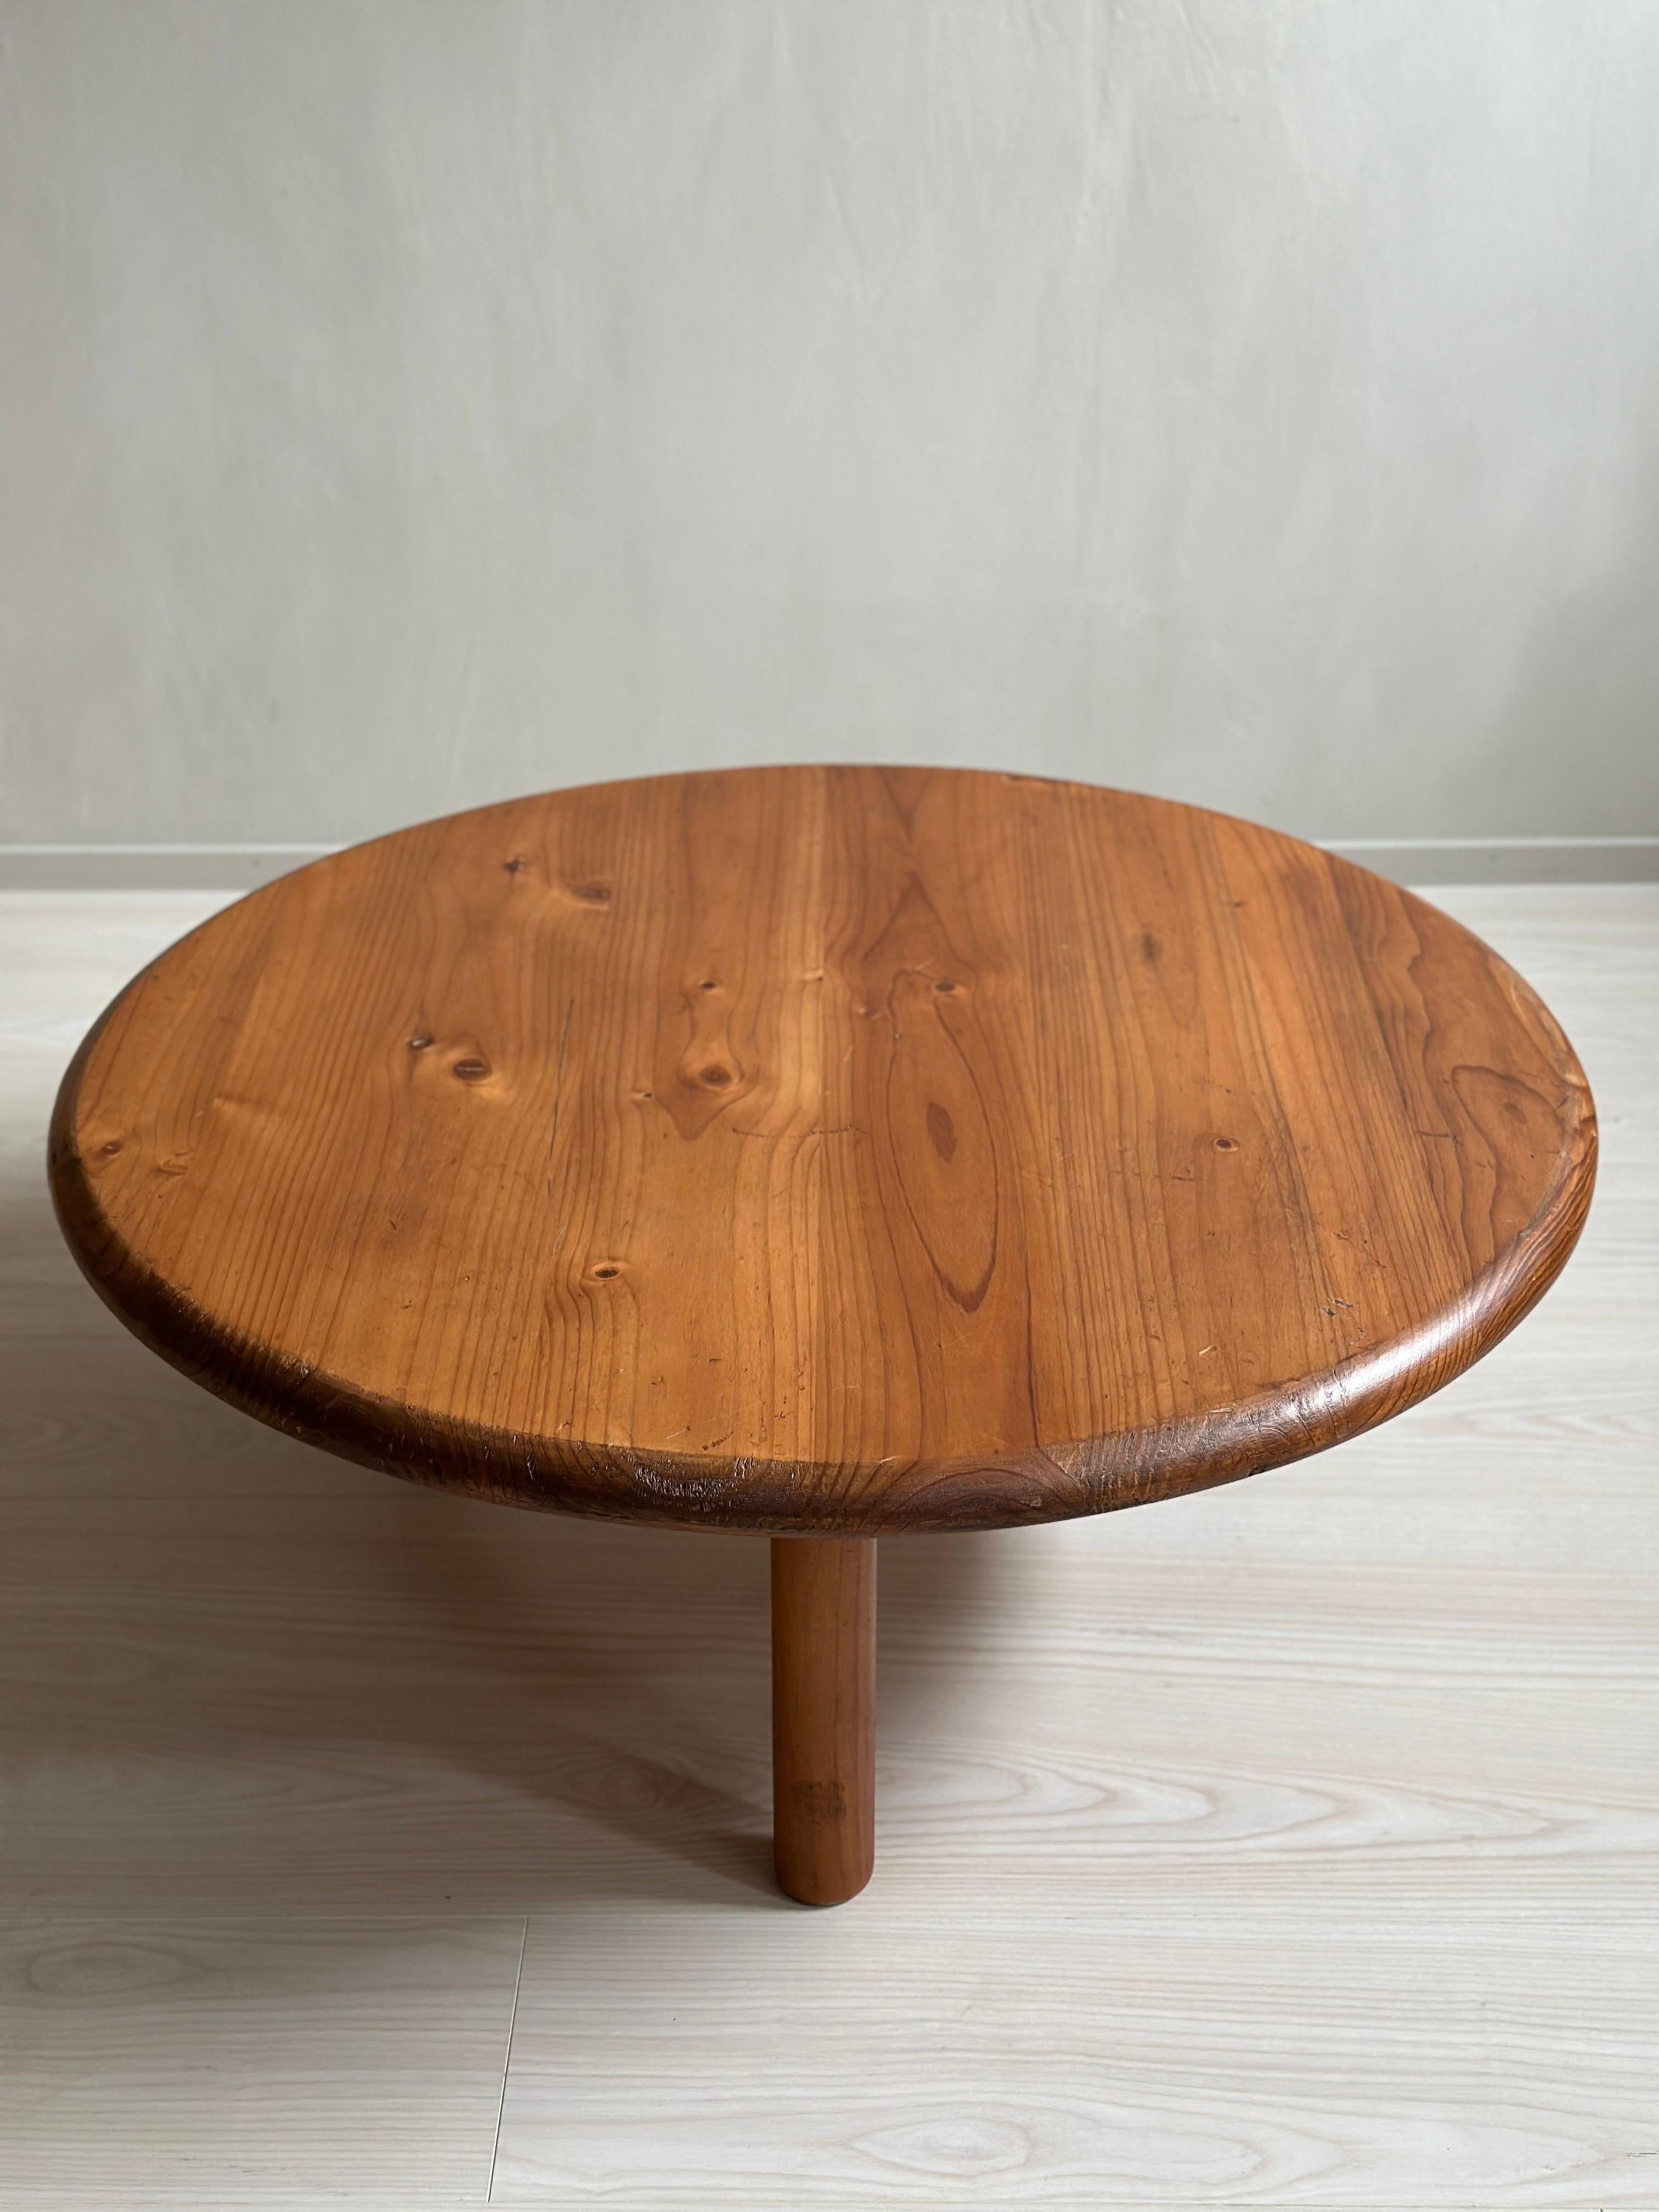 20th Century Midcentury Coffee Table in the Manner of Charlotte Perriand, Pine, circa 1960s